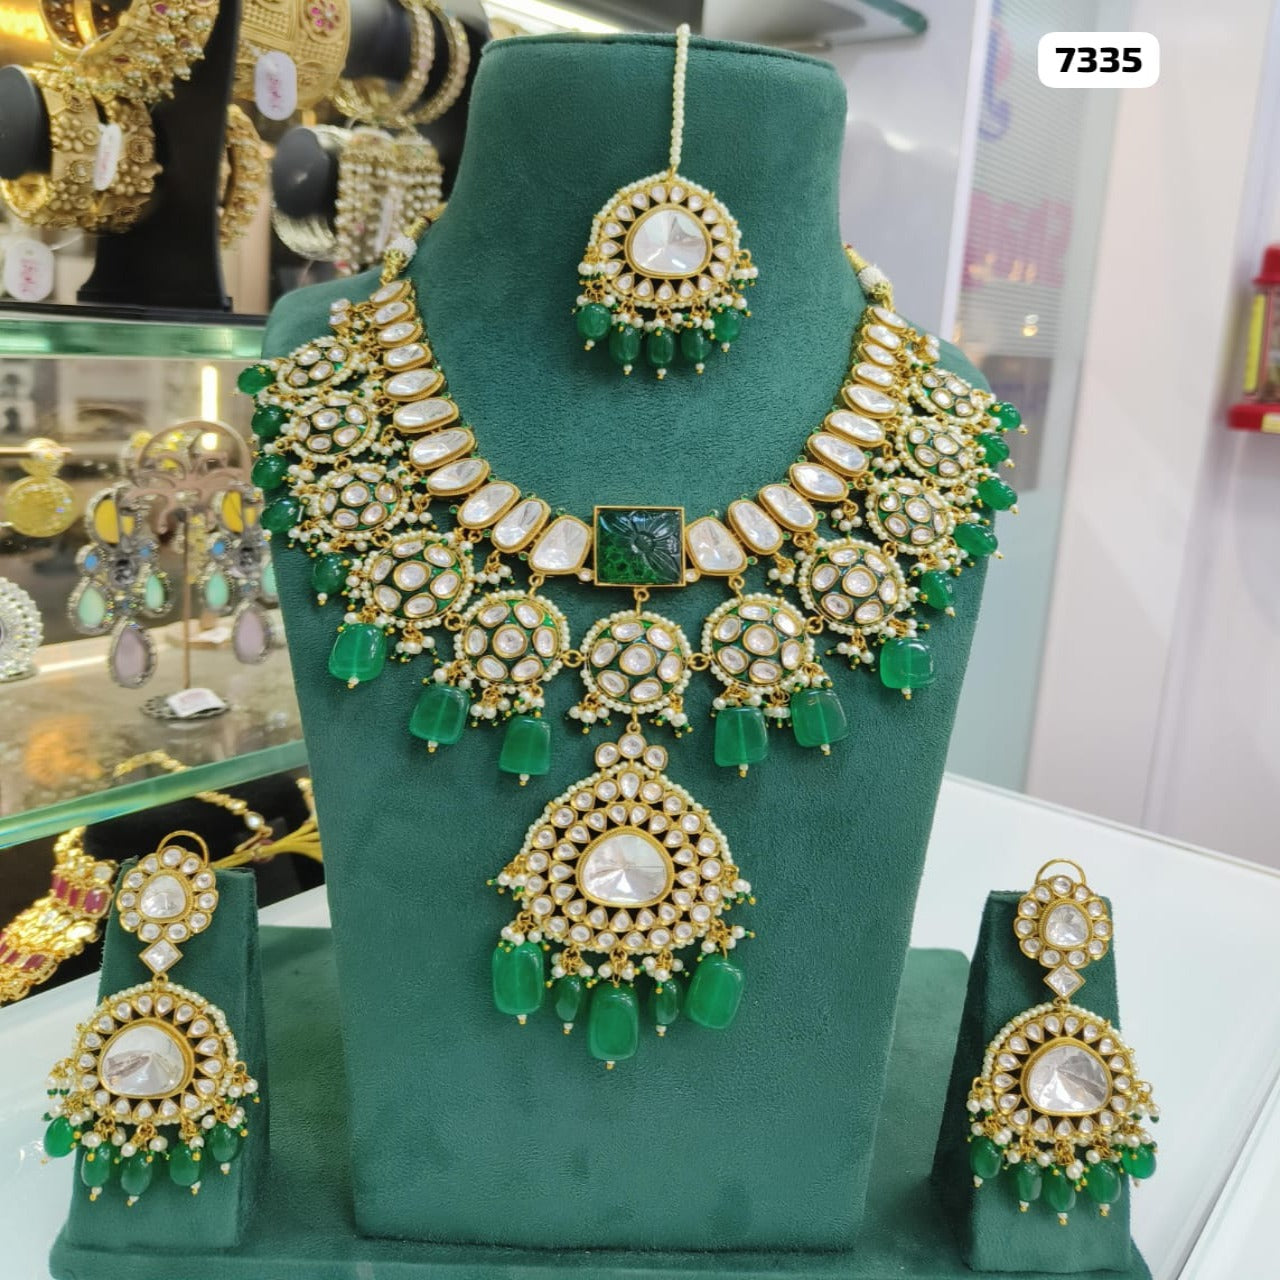 Exquisite Polki Un-cut Kundan Necklace Set with Earrings and Maangtikka - Timeless Elegance and Traditional Glamour